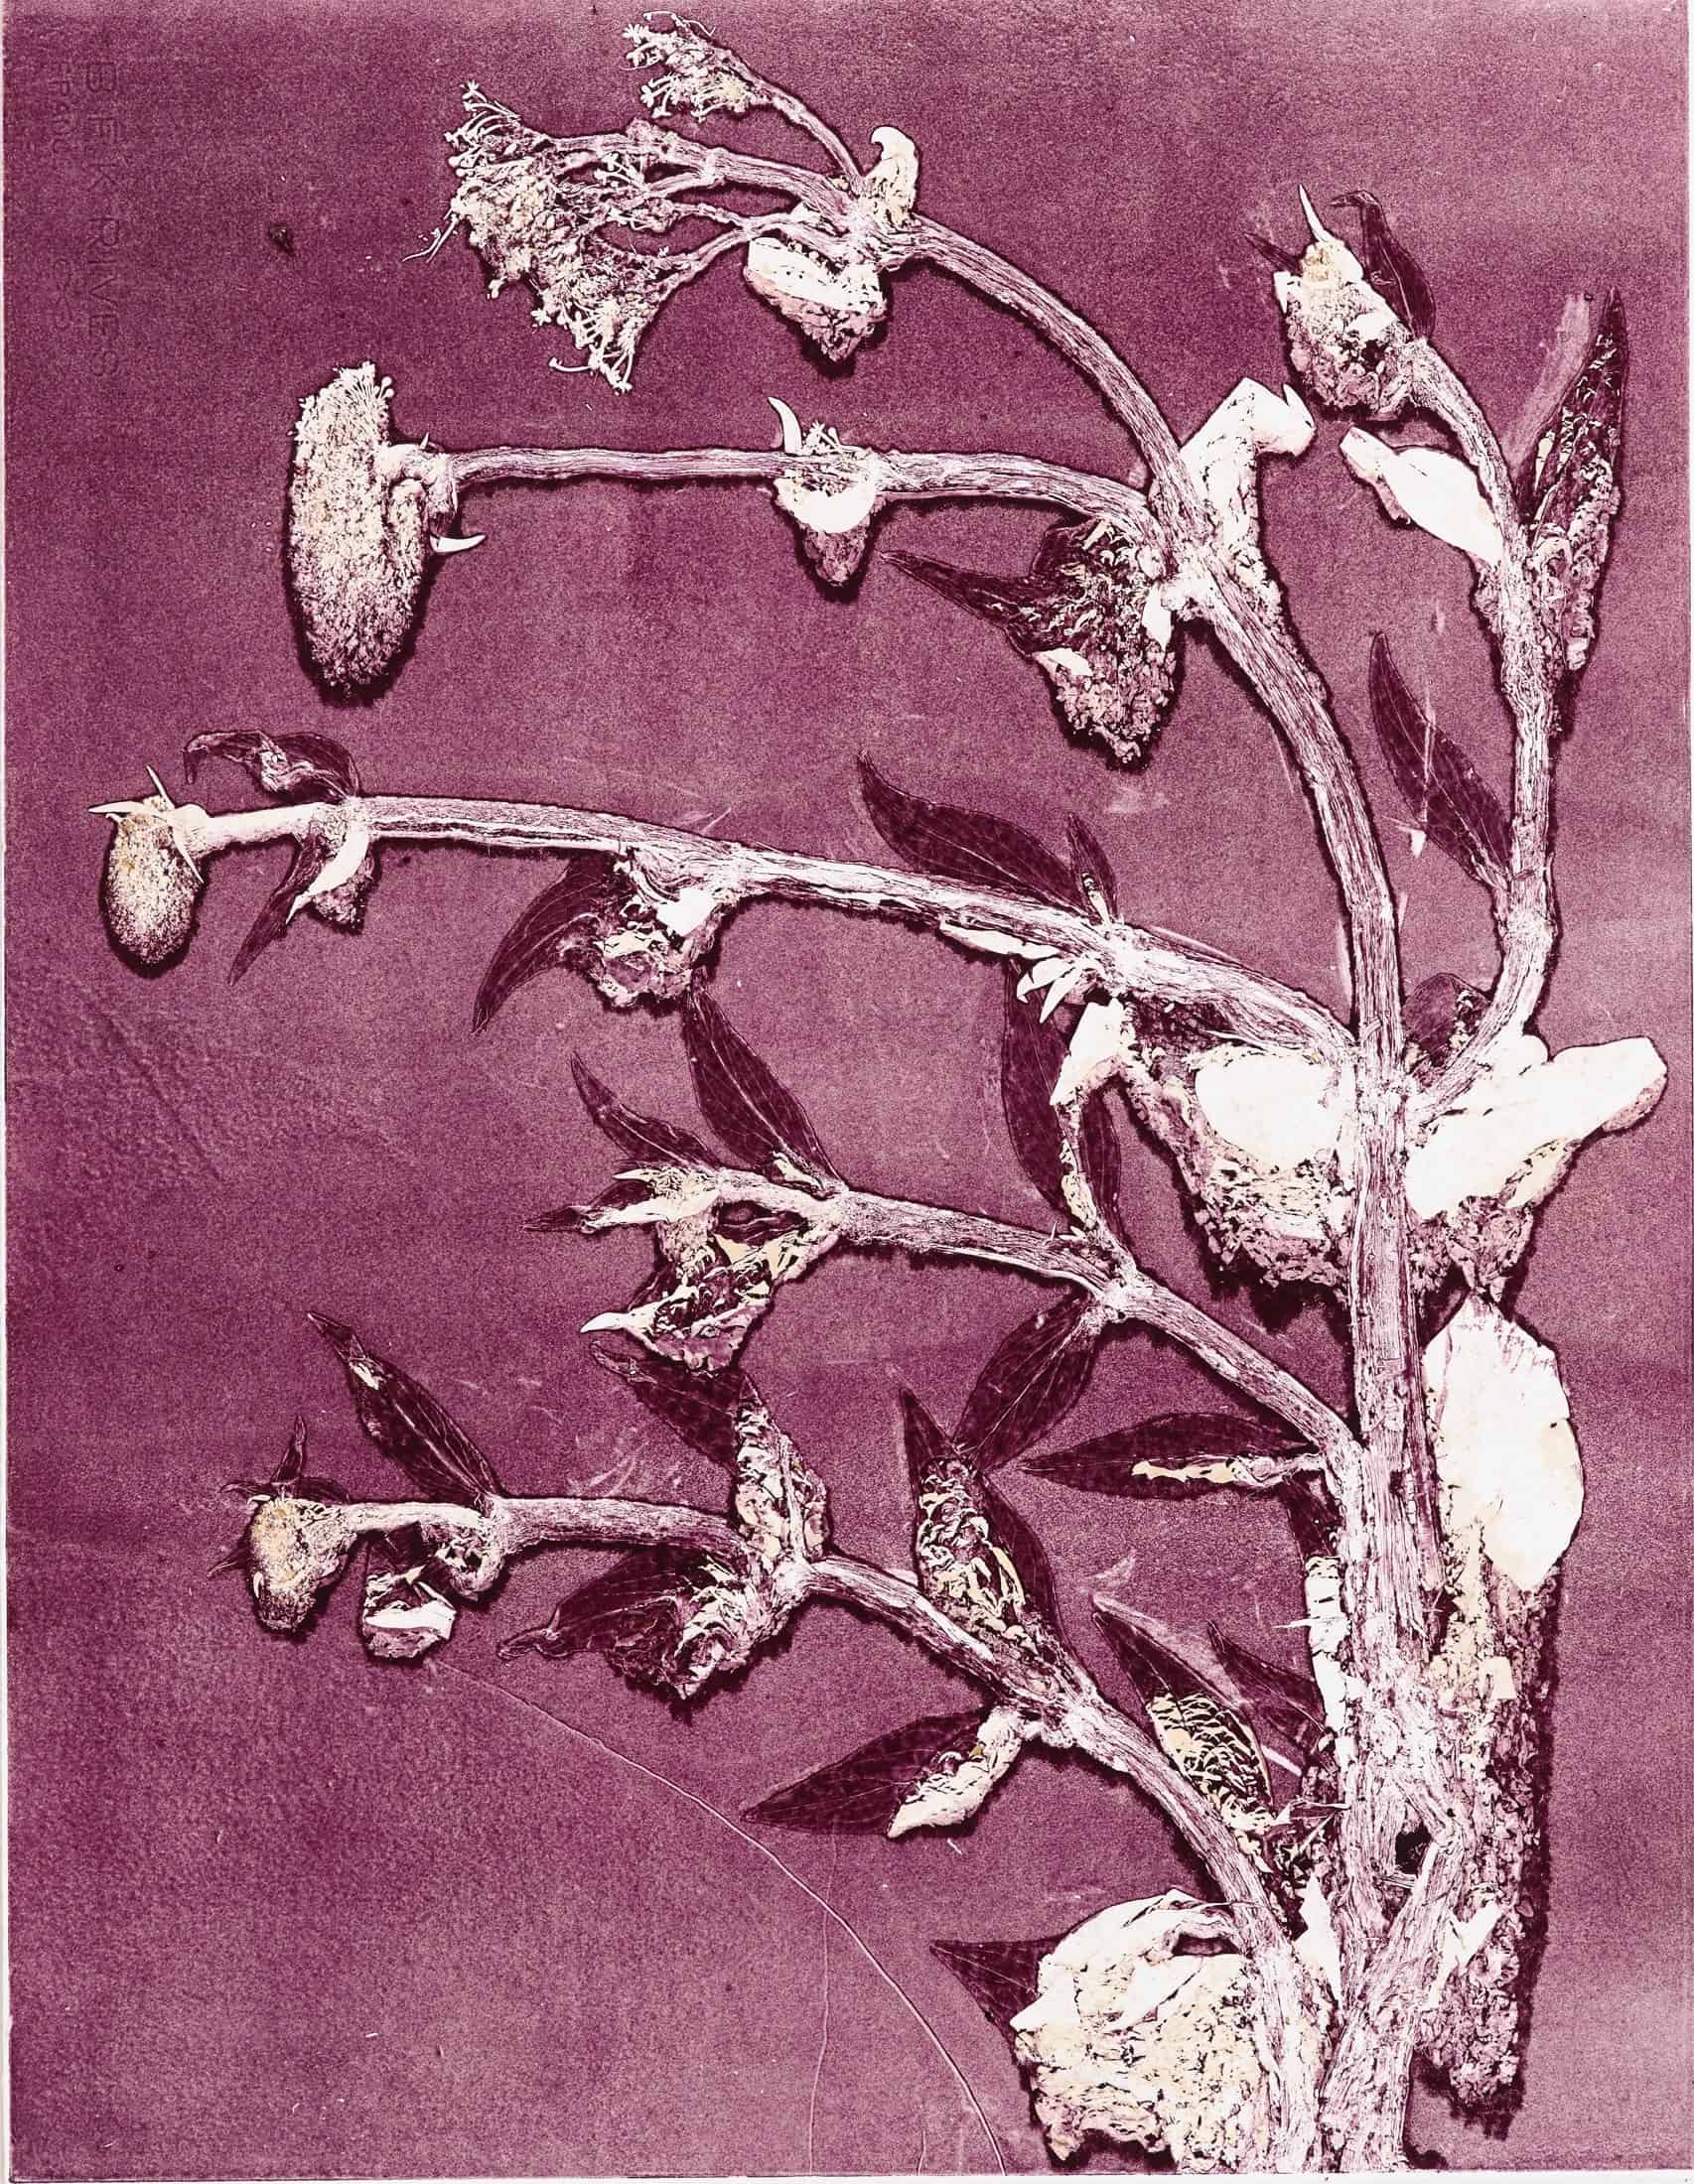 Monoprint by Thomas Fougeirol in The Role of a Flower curated by Marie Salomé